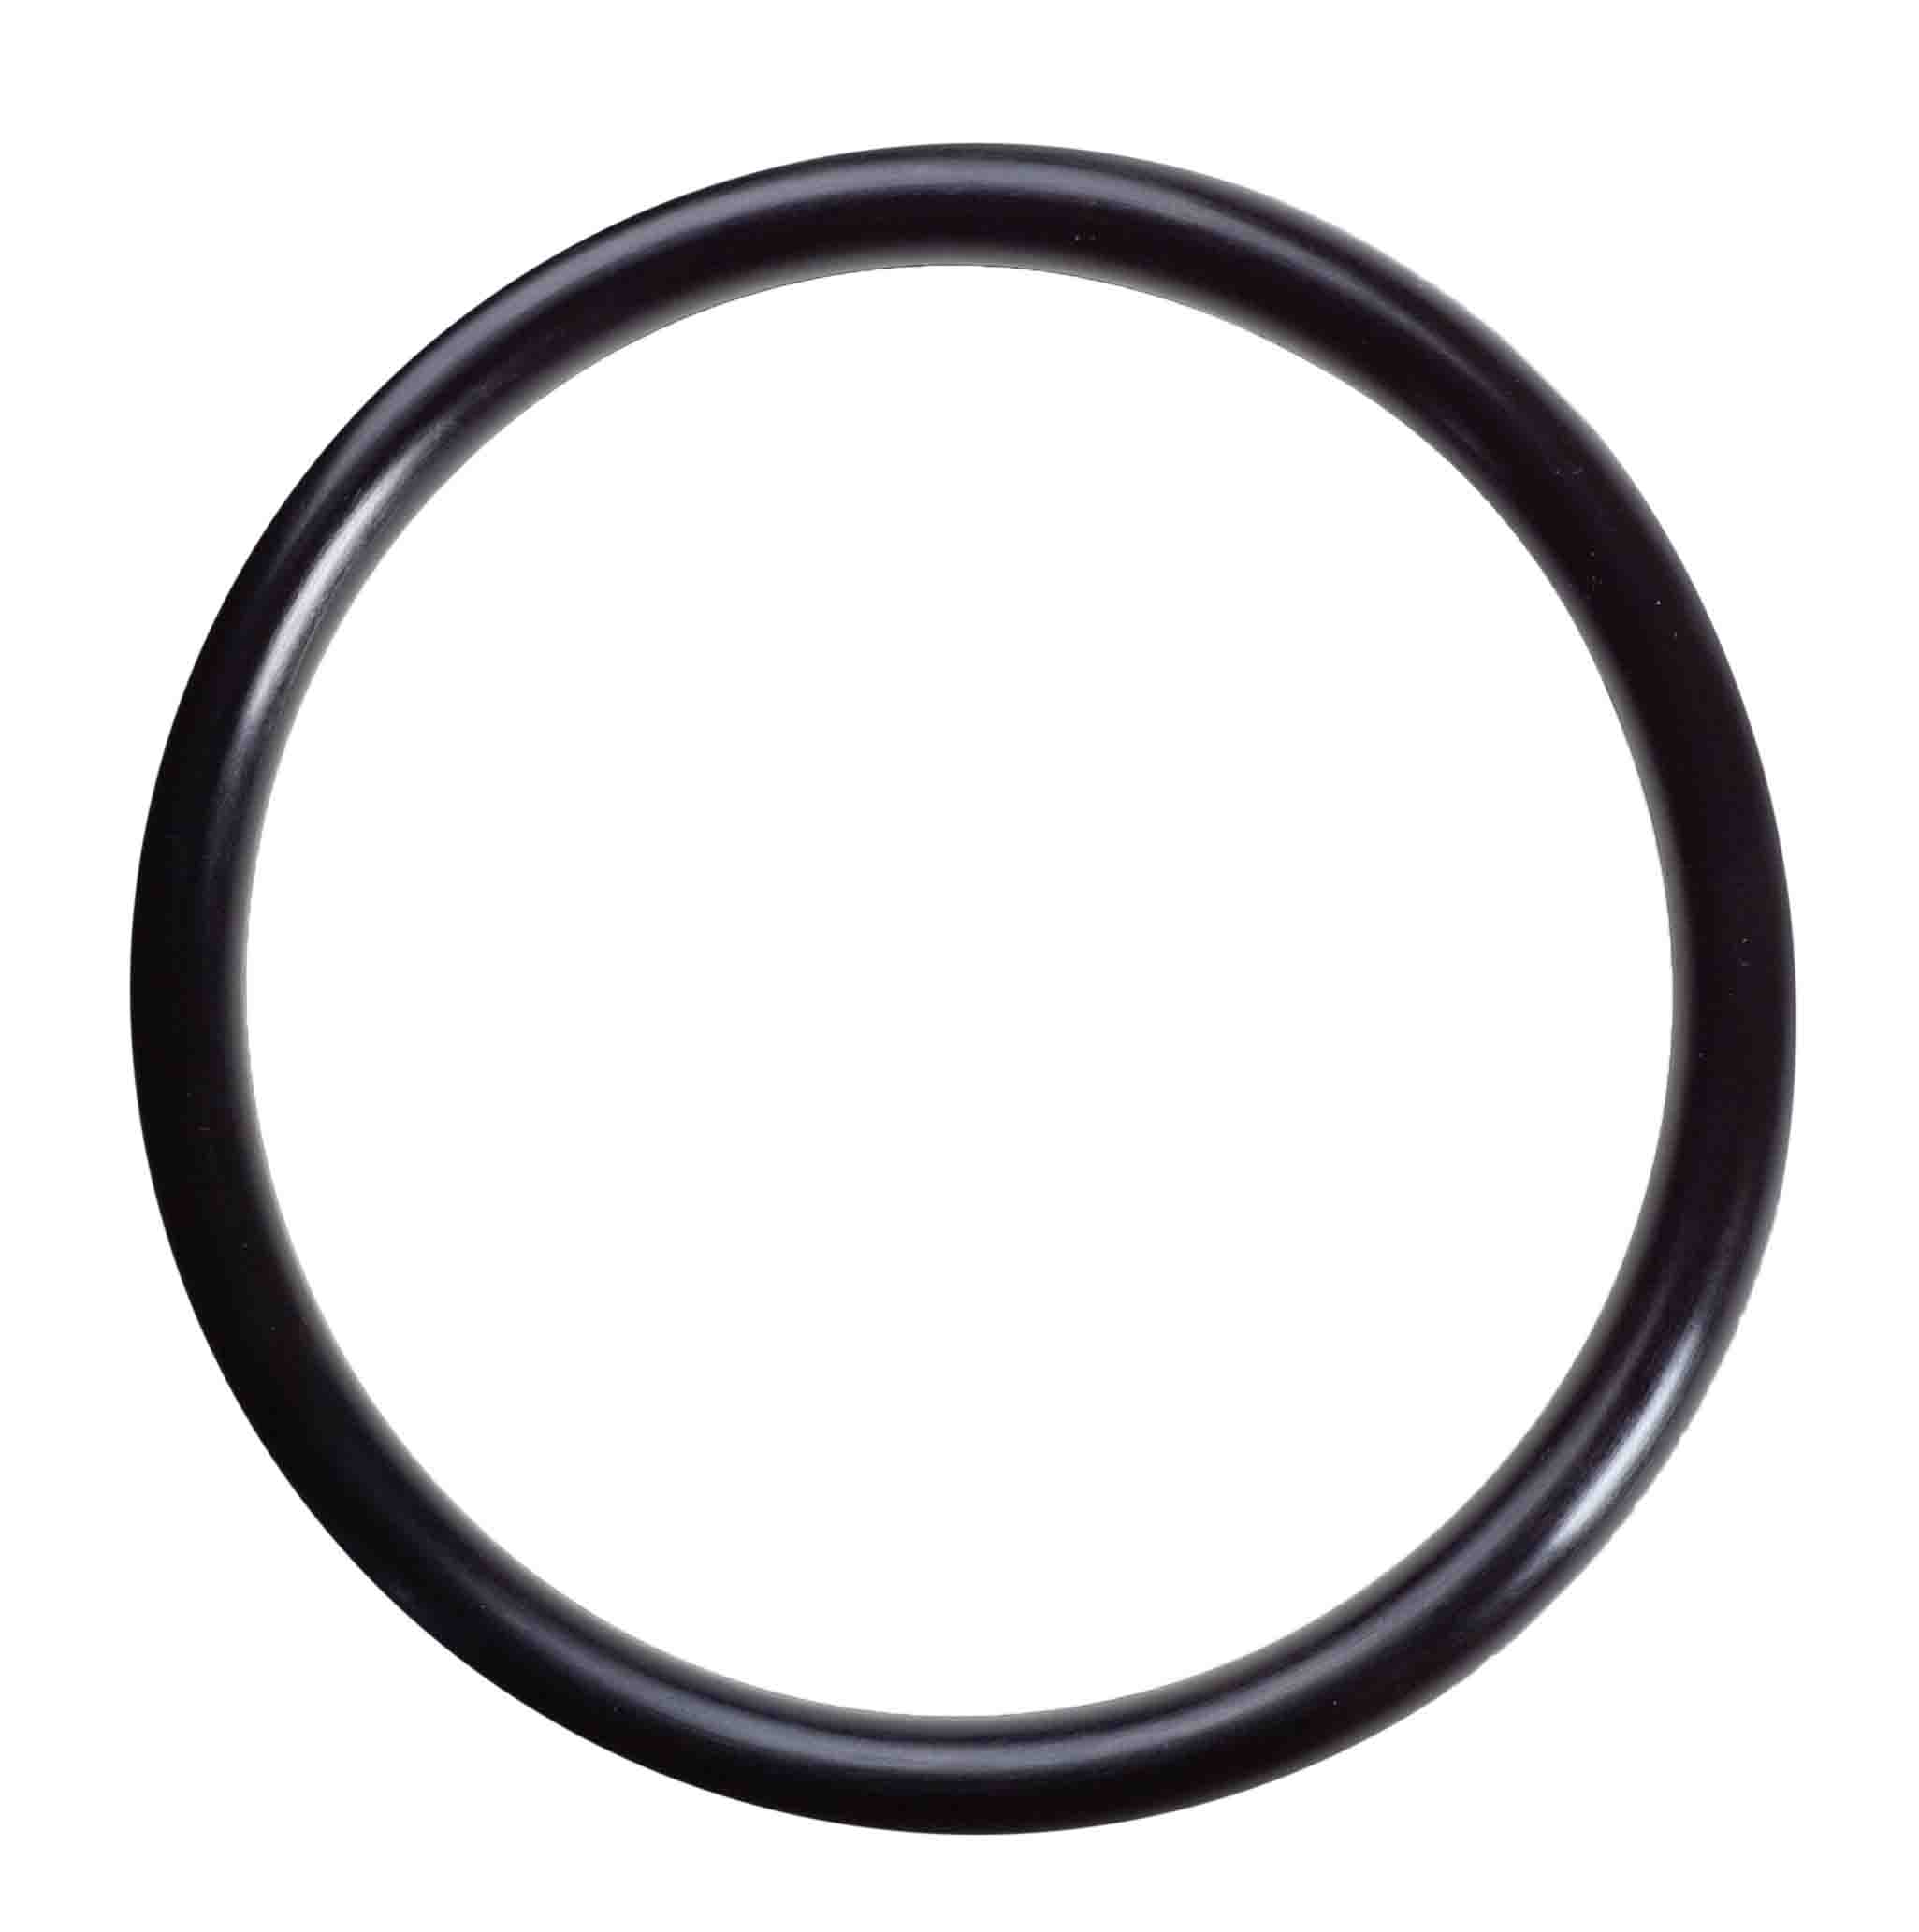 06808 LS - Housing O-rings for Nanopure II system